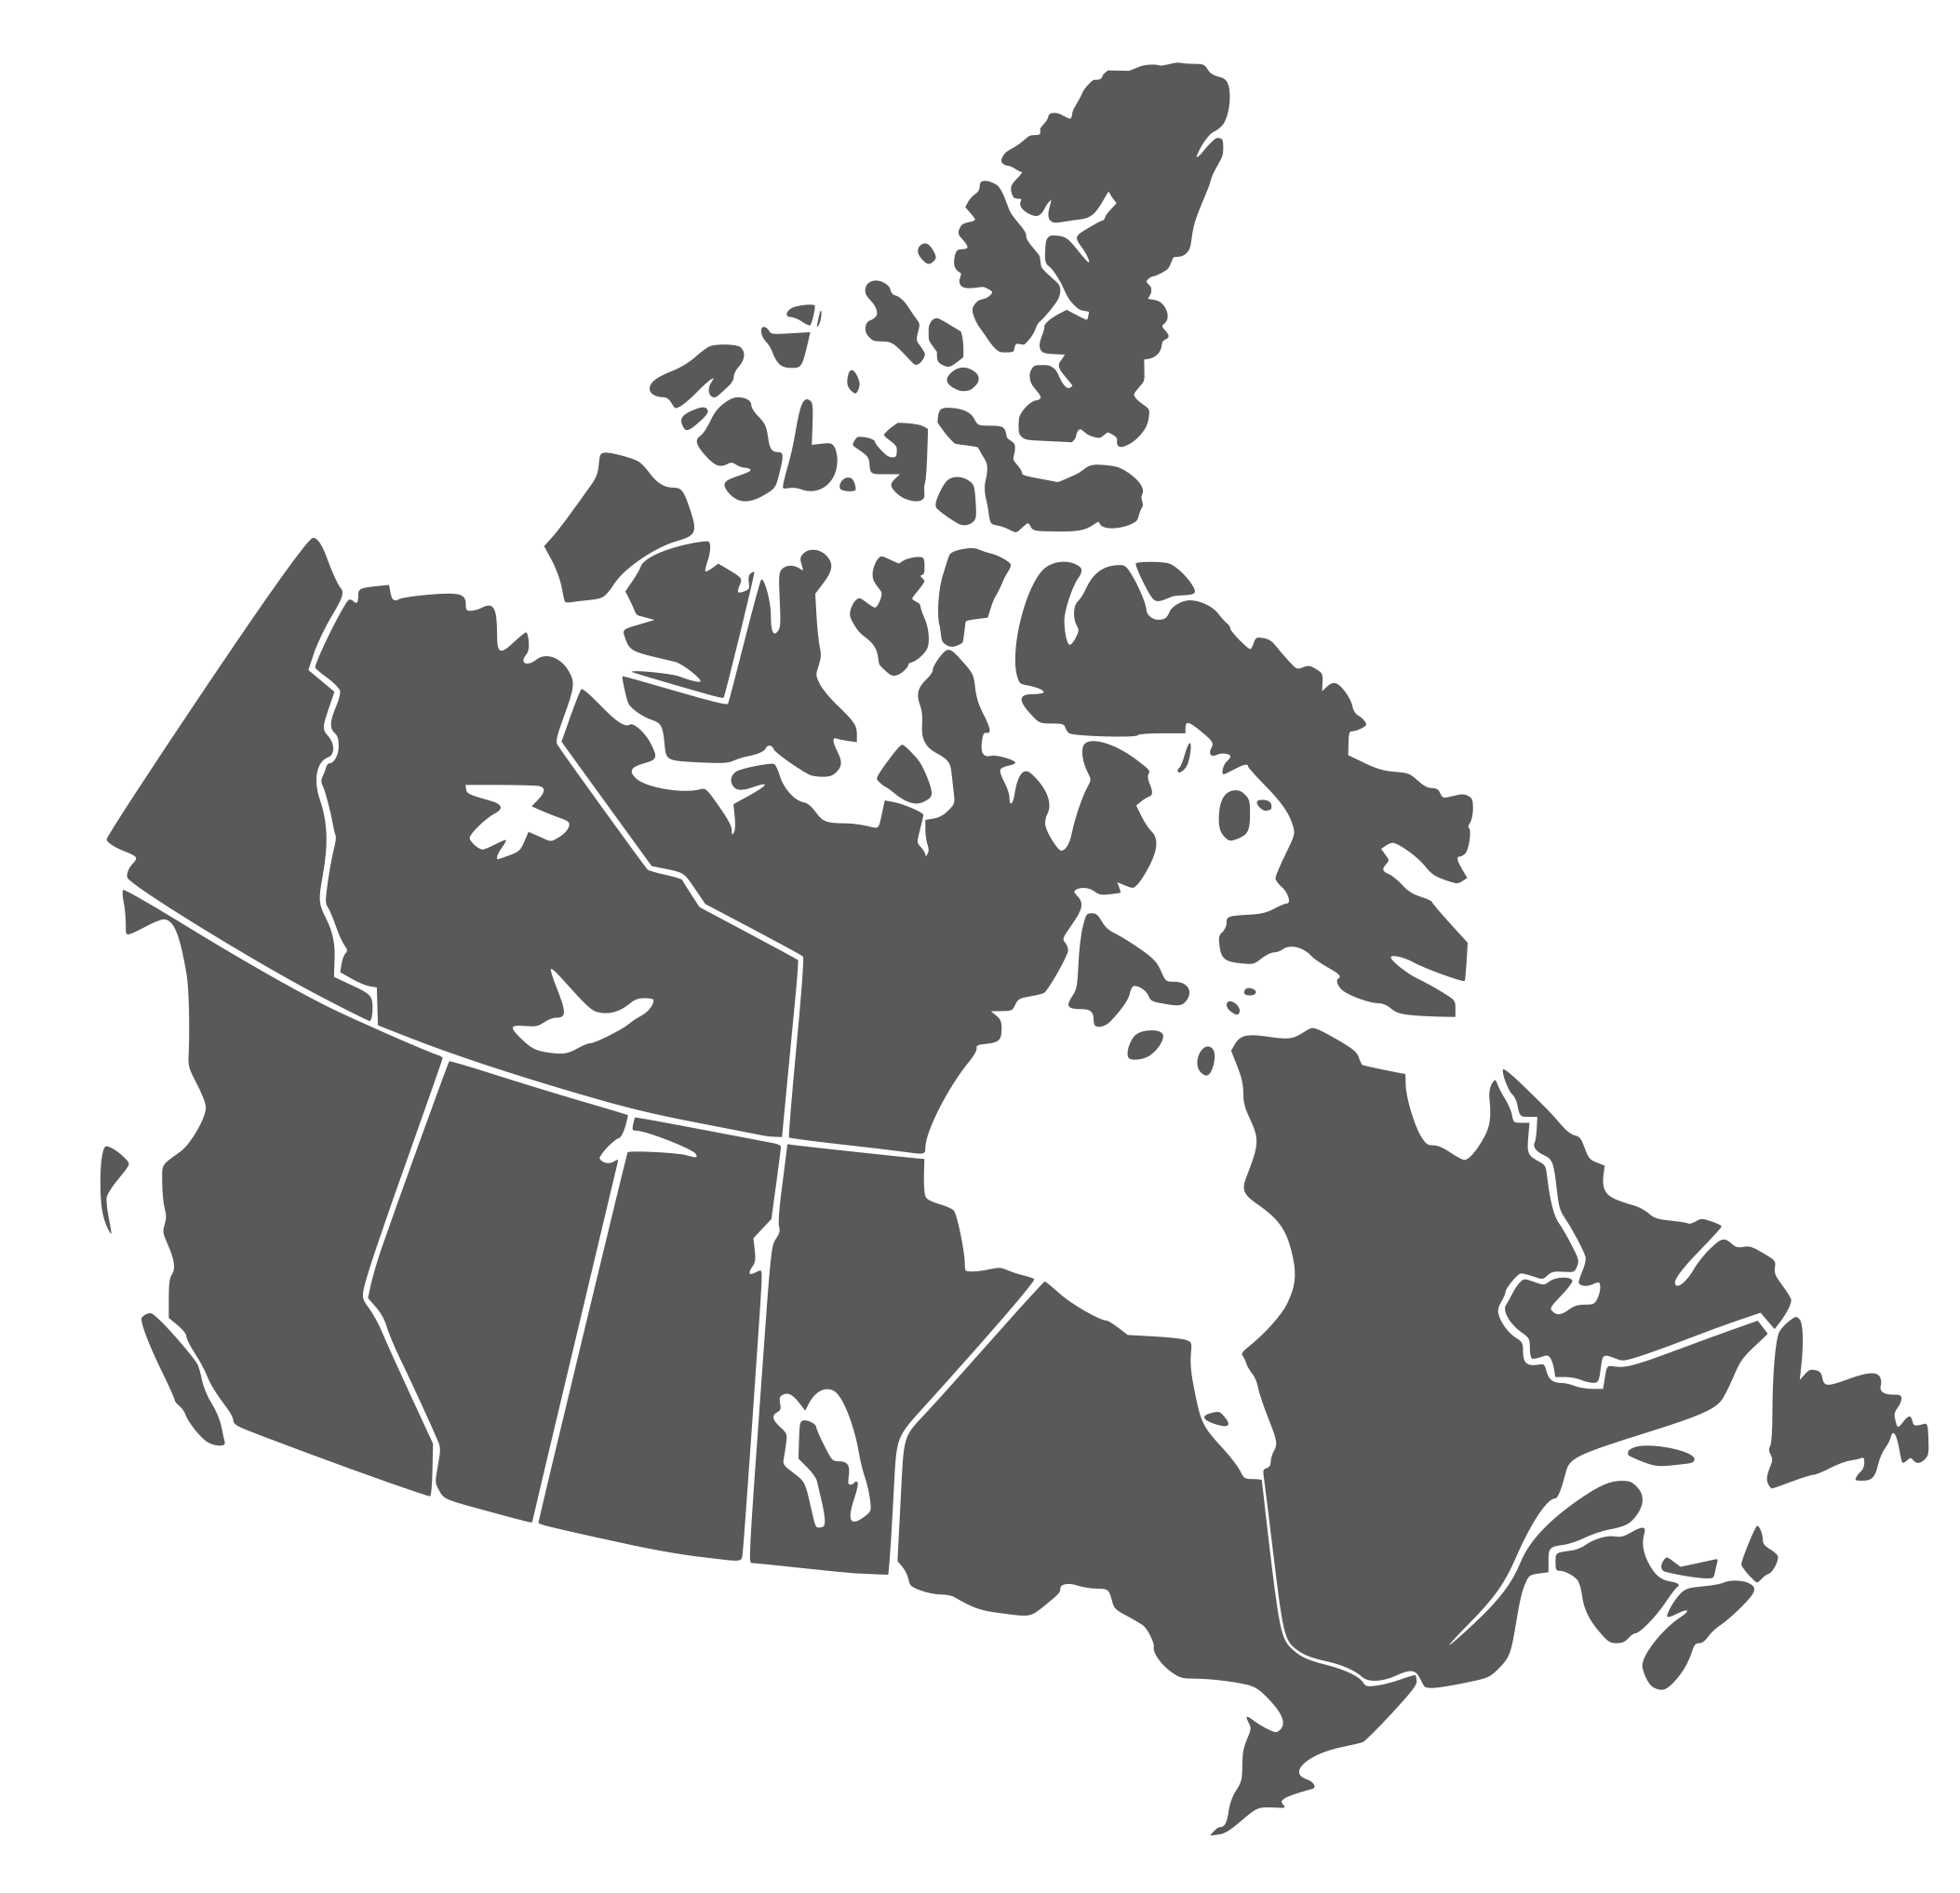 Map of Canada.